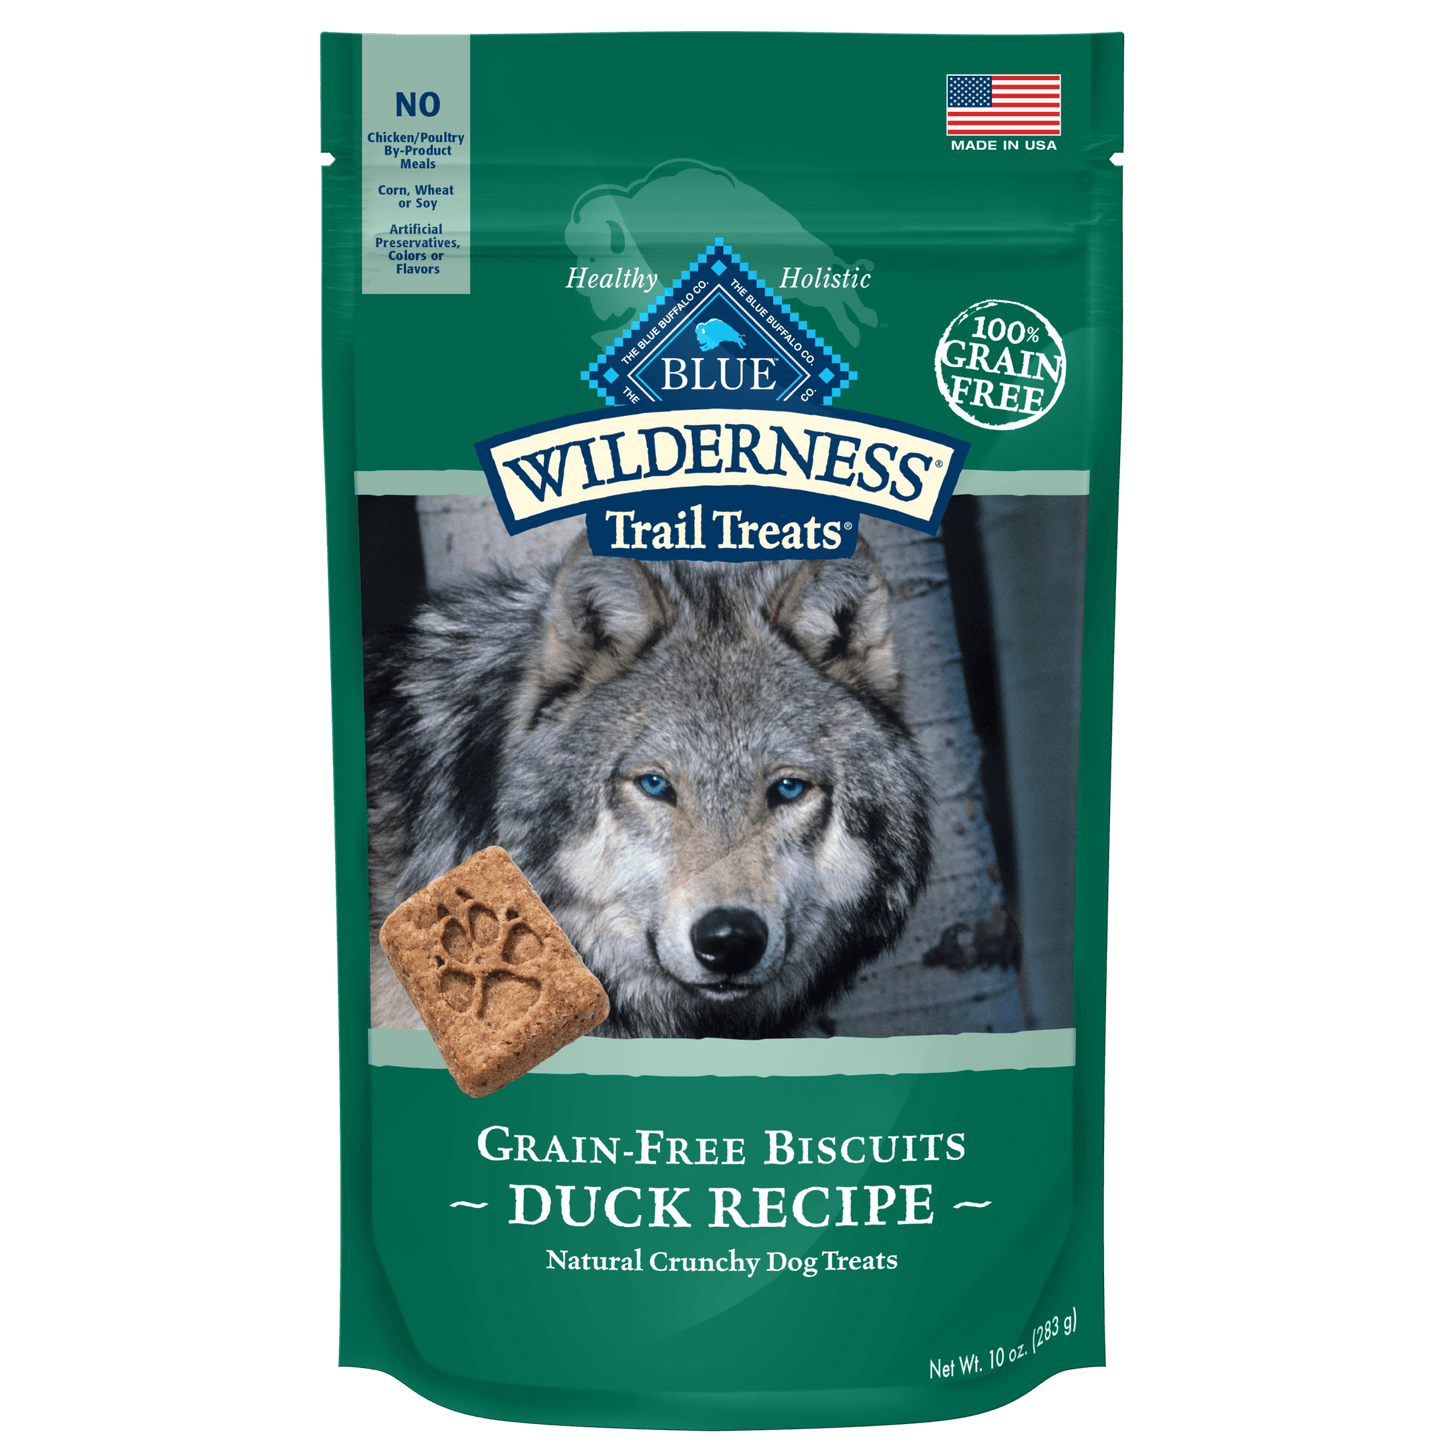 Blue Buffalo Wilderness Trail Treats High Protein Duck Flavor Crunchy Biscuit Treats for Dogs  Grain-Free  10 oz. Bag